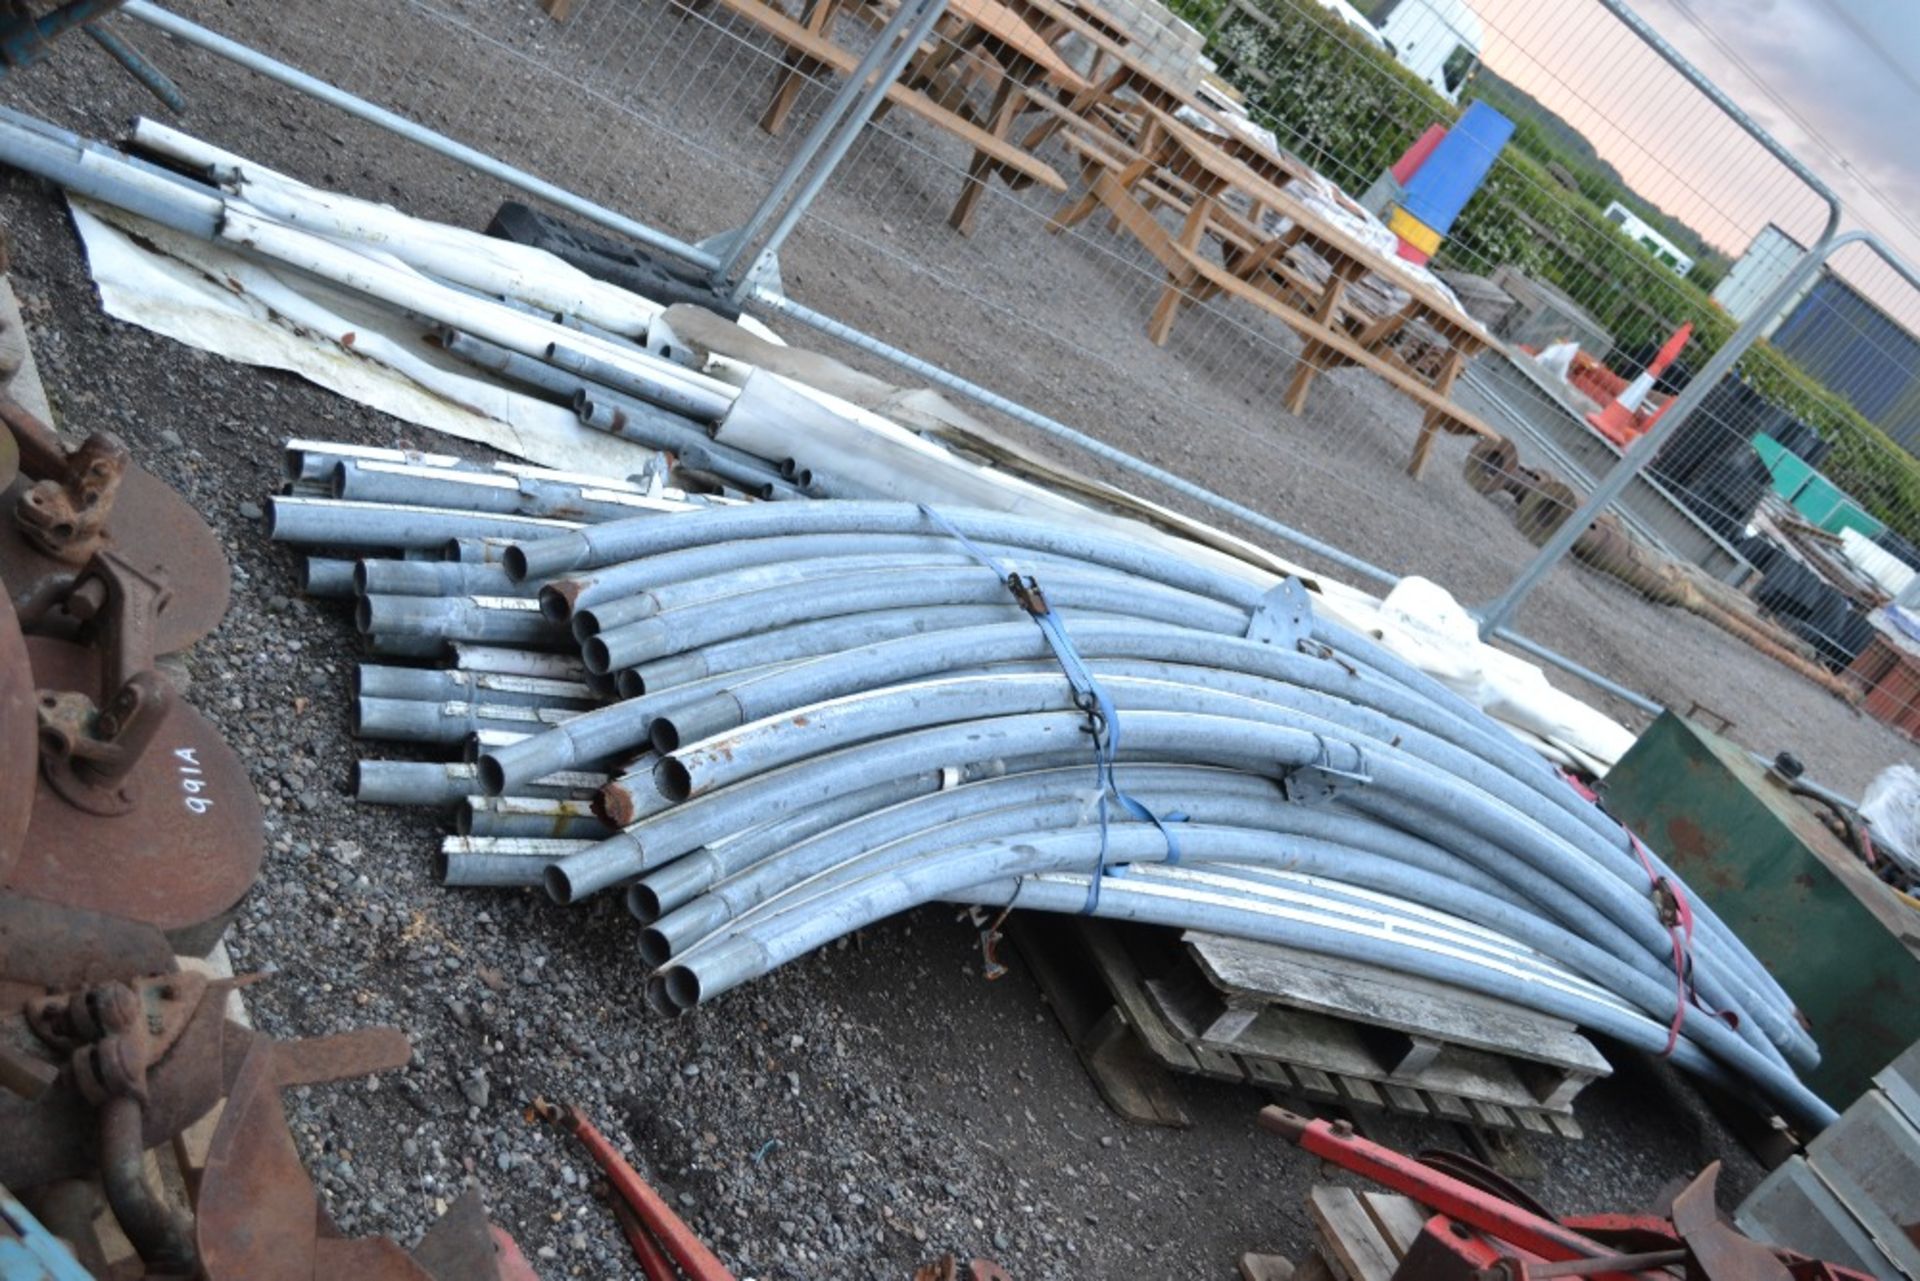 20m x 10m galvanised poly tunnel frame. *